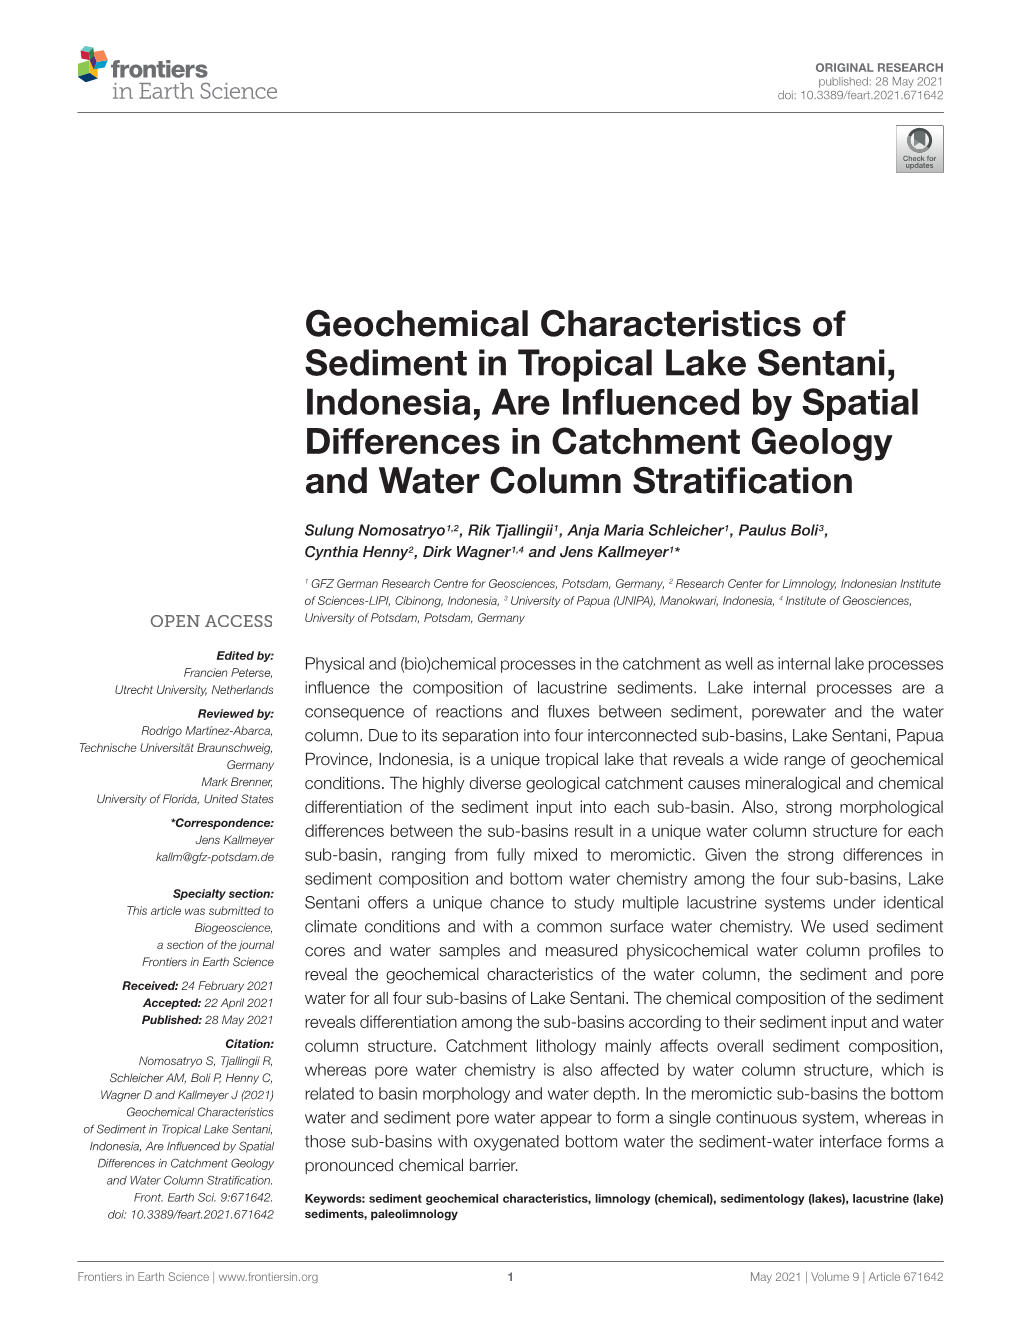 Geochemical Characteristics of Sediment in Tropical Lake Sentani, Indonesia, Are Inﬂuenced by Spatial Differences in Catchment Geology and Water Column Stratiﬁcation